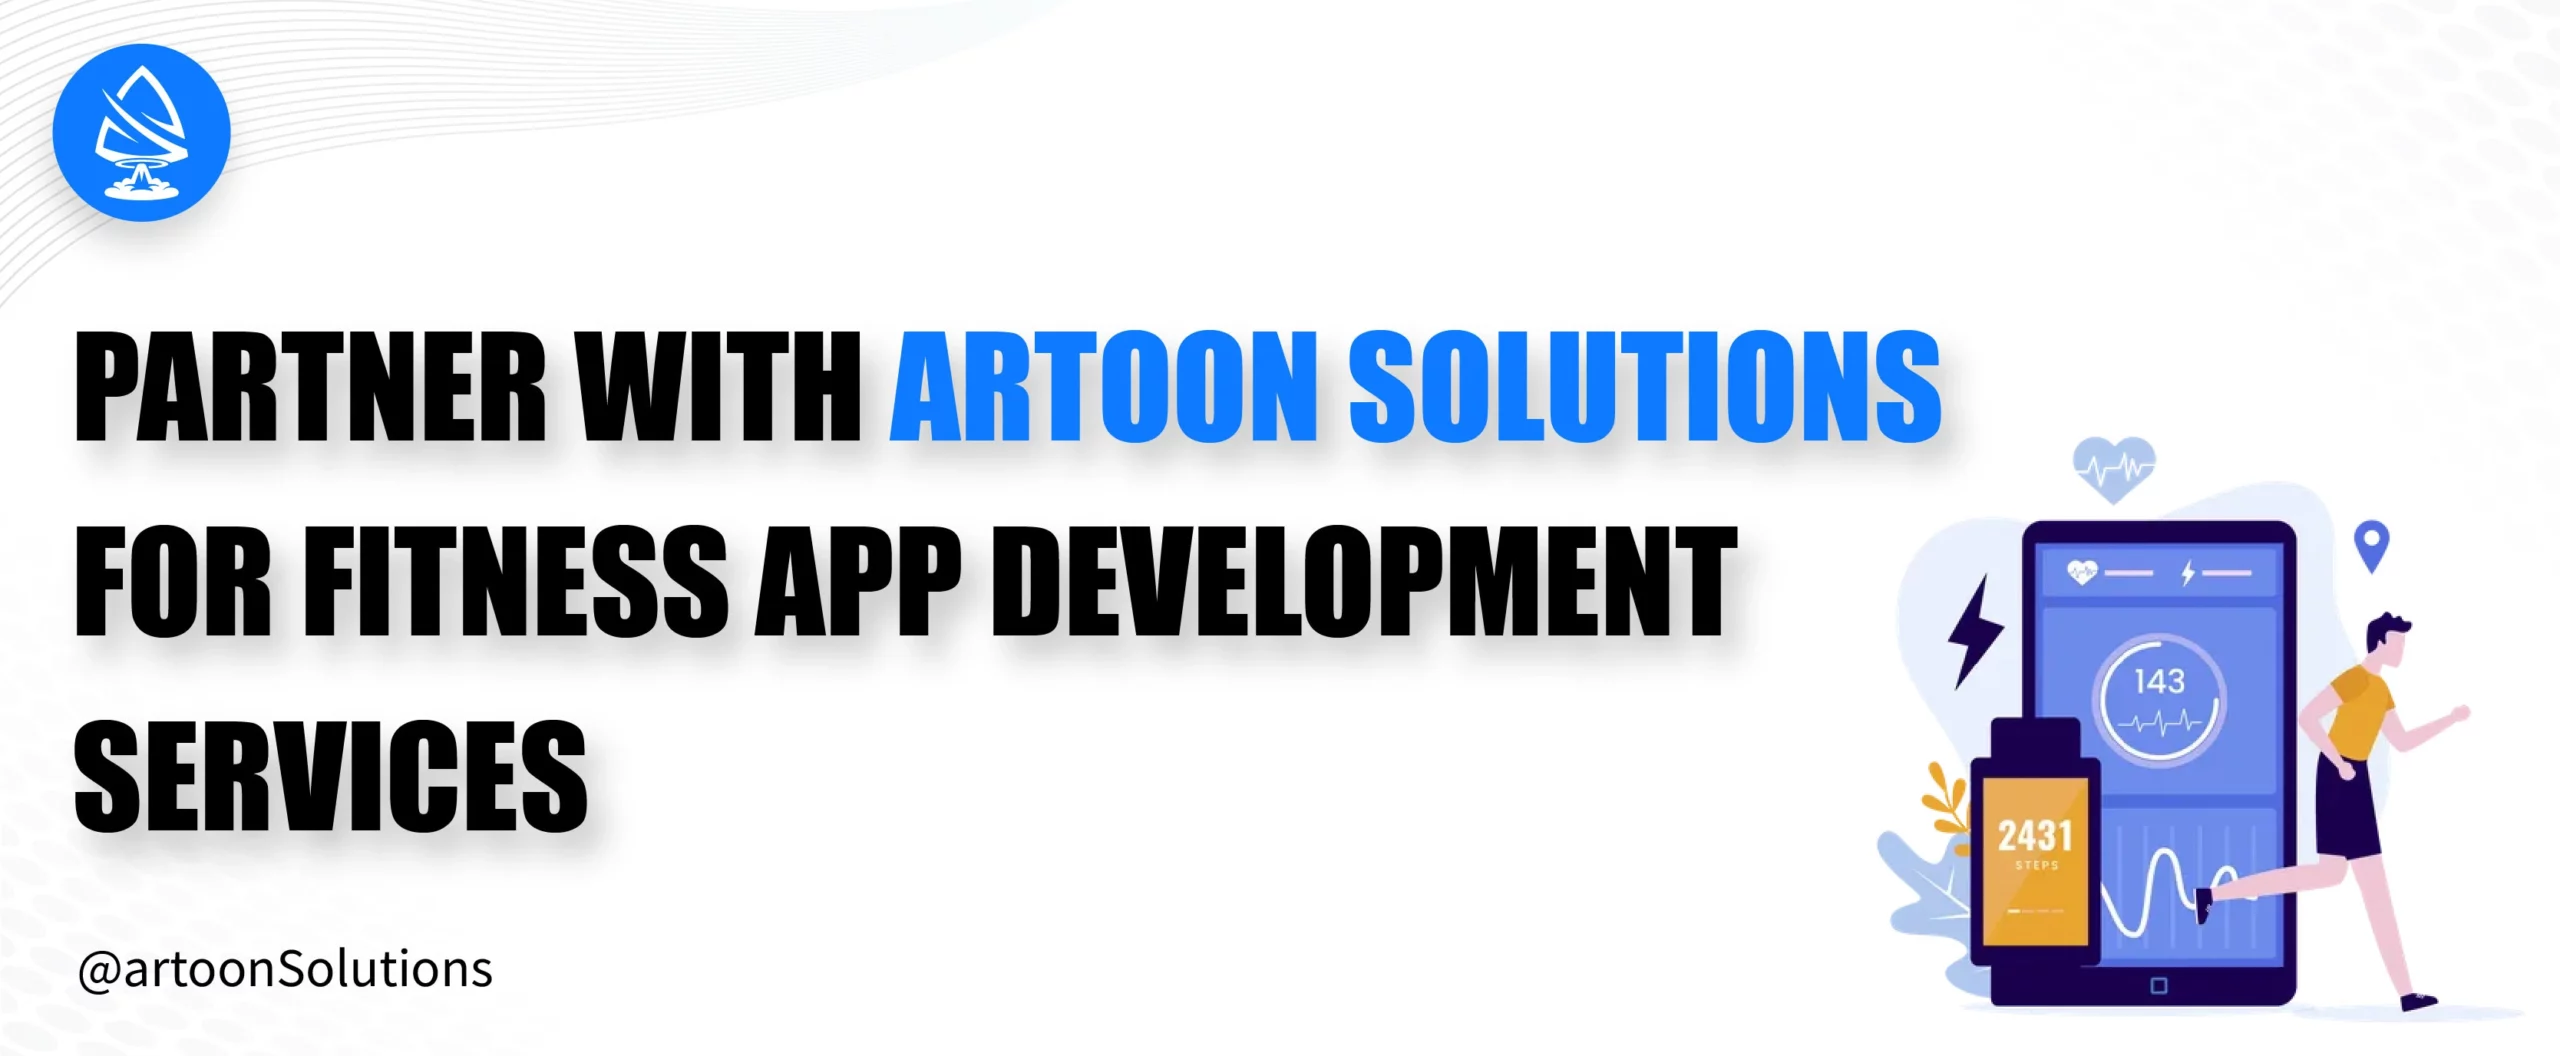 Partner with Artoon Solutions for Fitness App Development Services